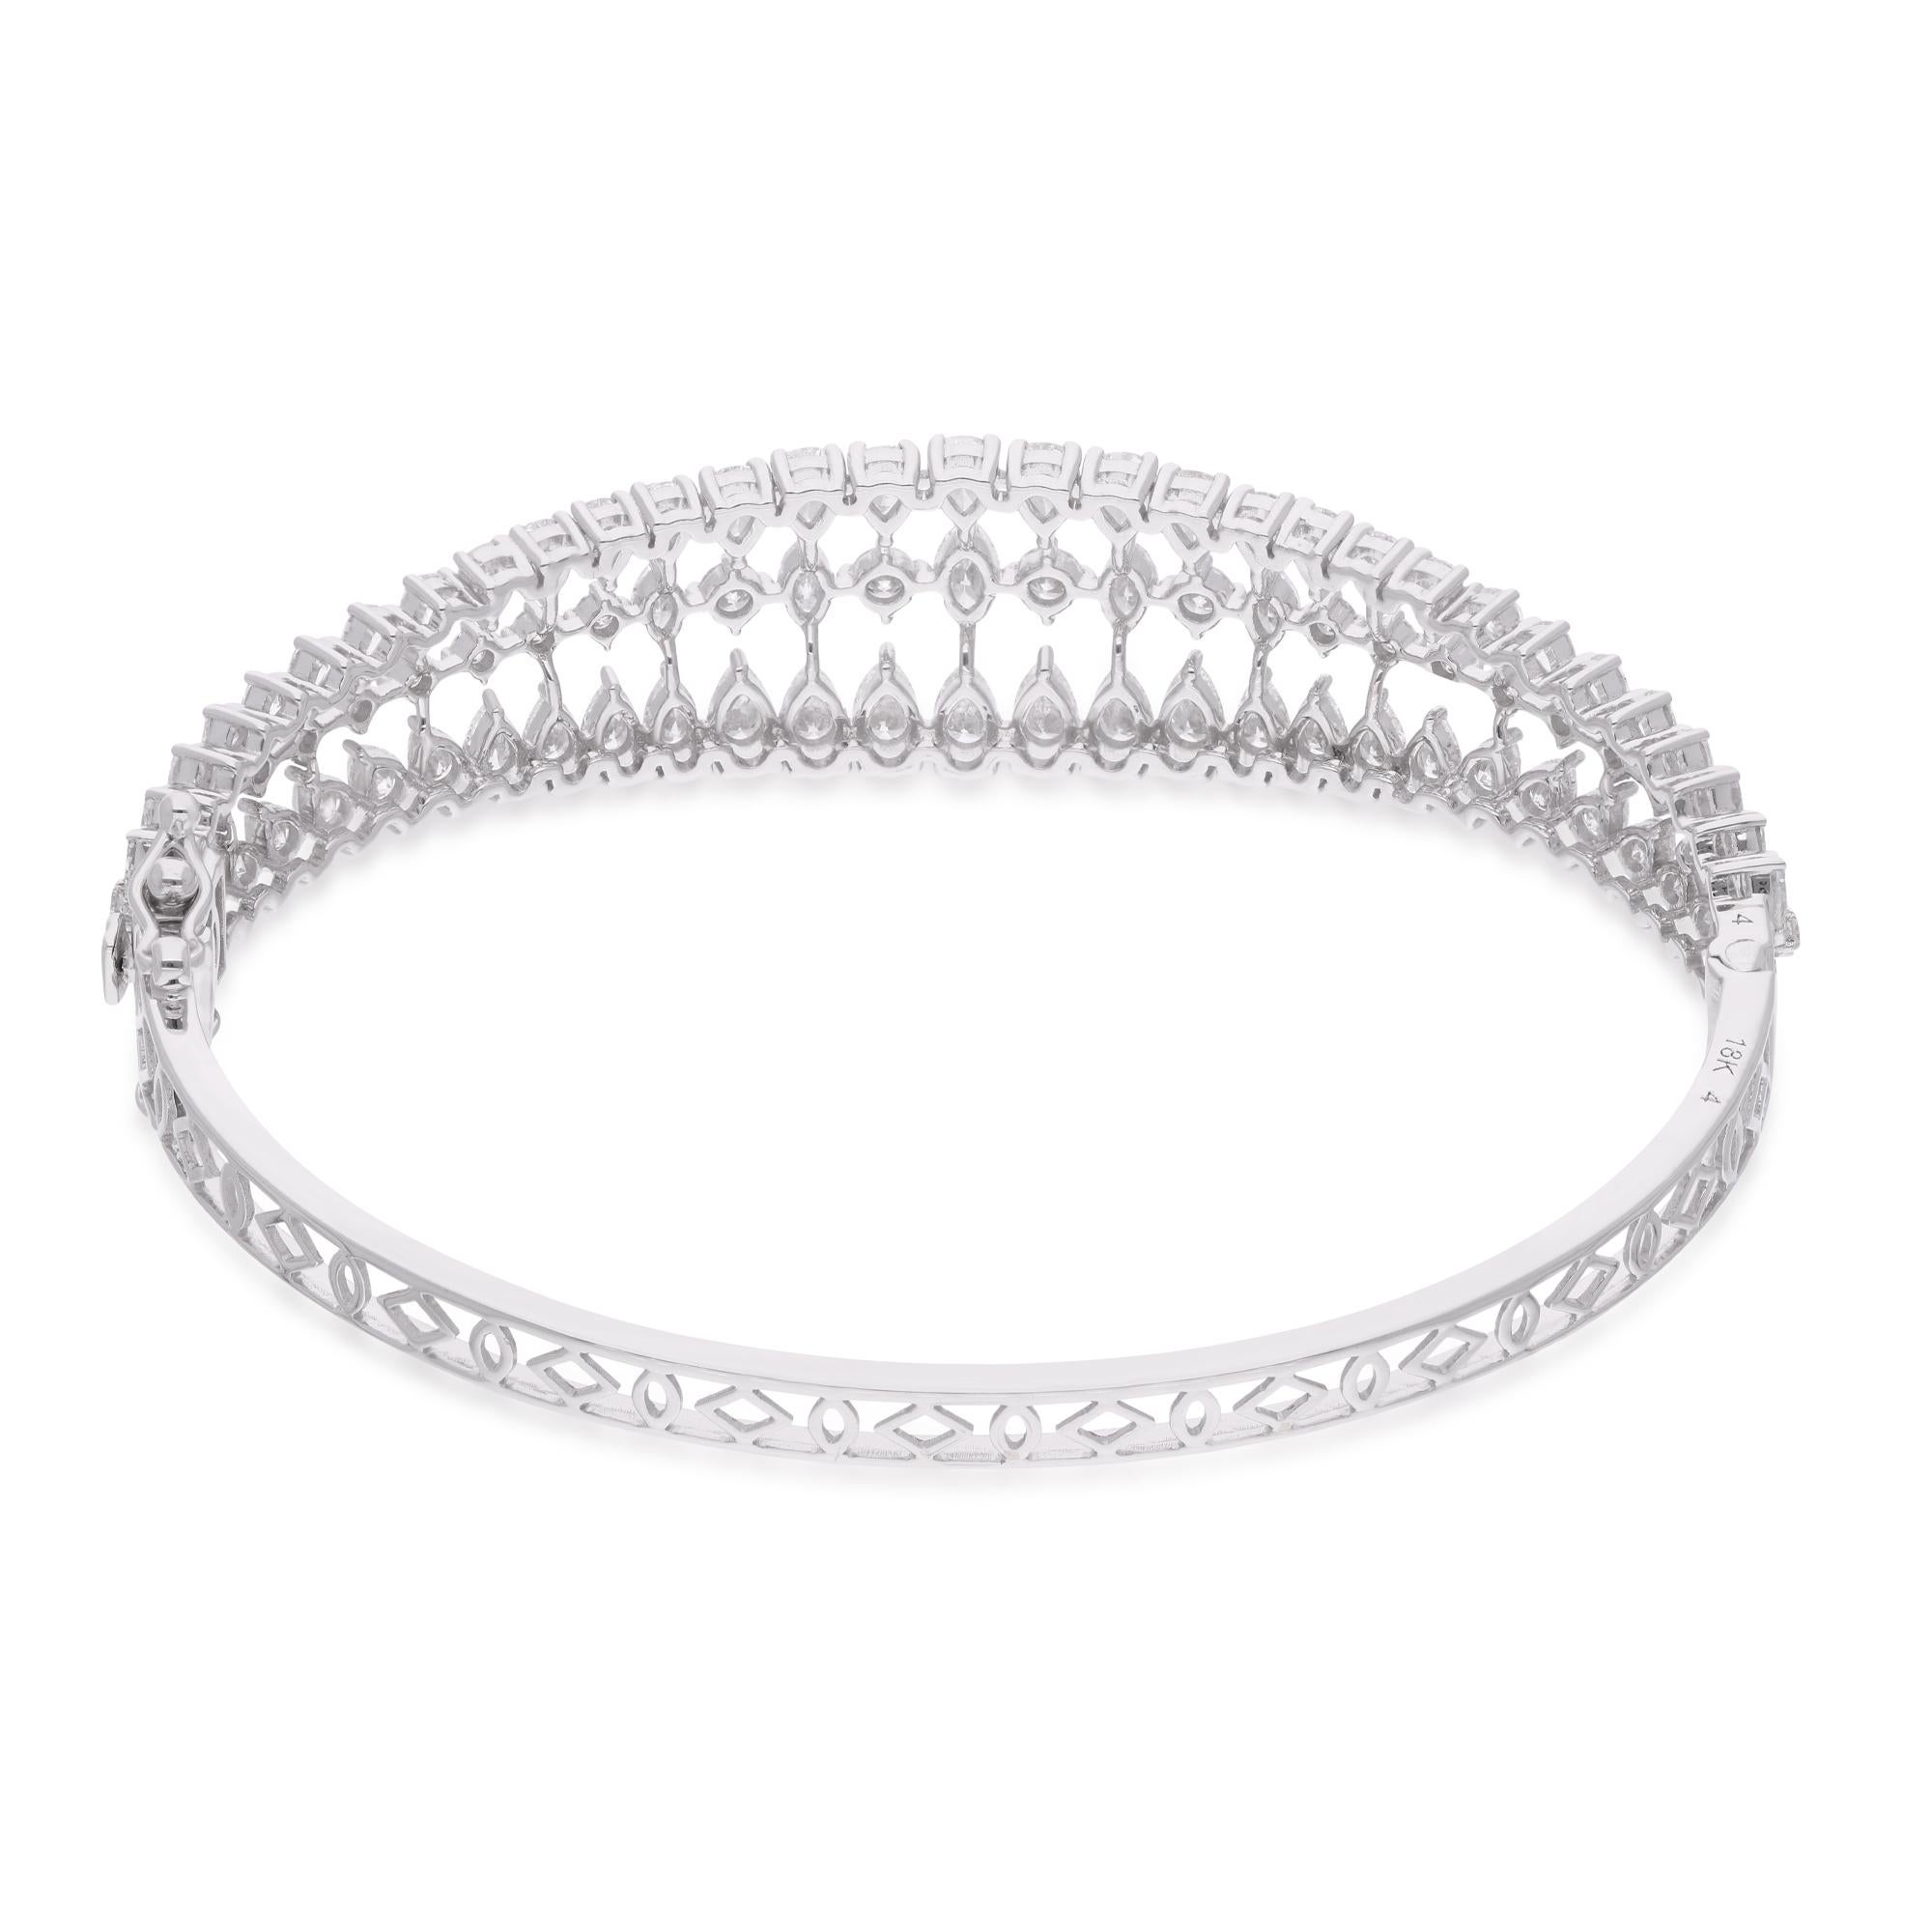 Step into the realm of unparalleled luxury with this extraordinary Natural 5.33 Carat Diamond Cage Bangle Bracelet, meticulously crafted in lustrous 18 karat white gold. This bracelet is a true testament to the artistry of fine jewelry